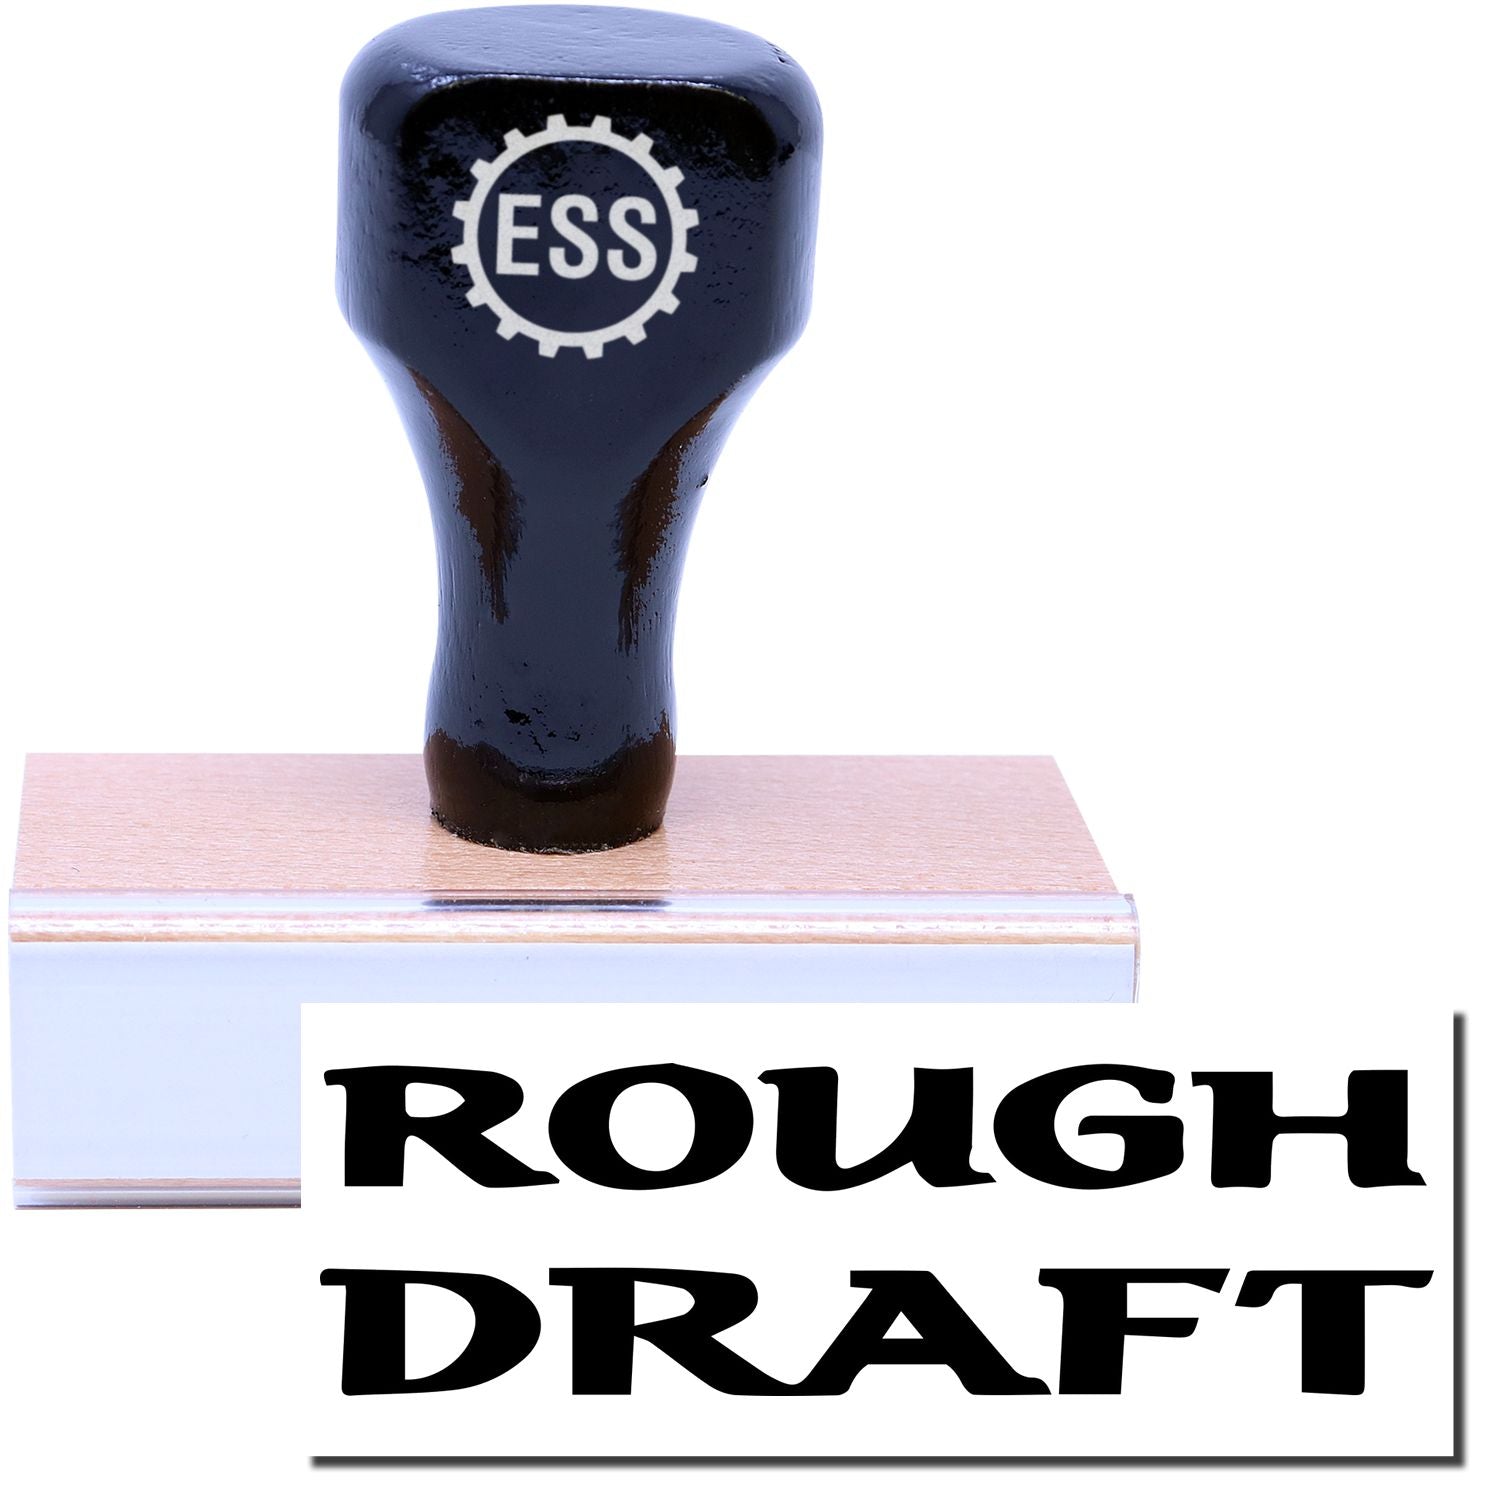 A stock office rubber stamp with a stamped image showing how the text "ROUGH DRAFT" in bold font is displayed after stamping.